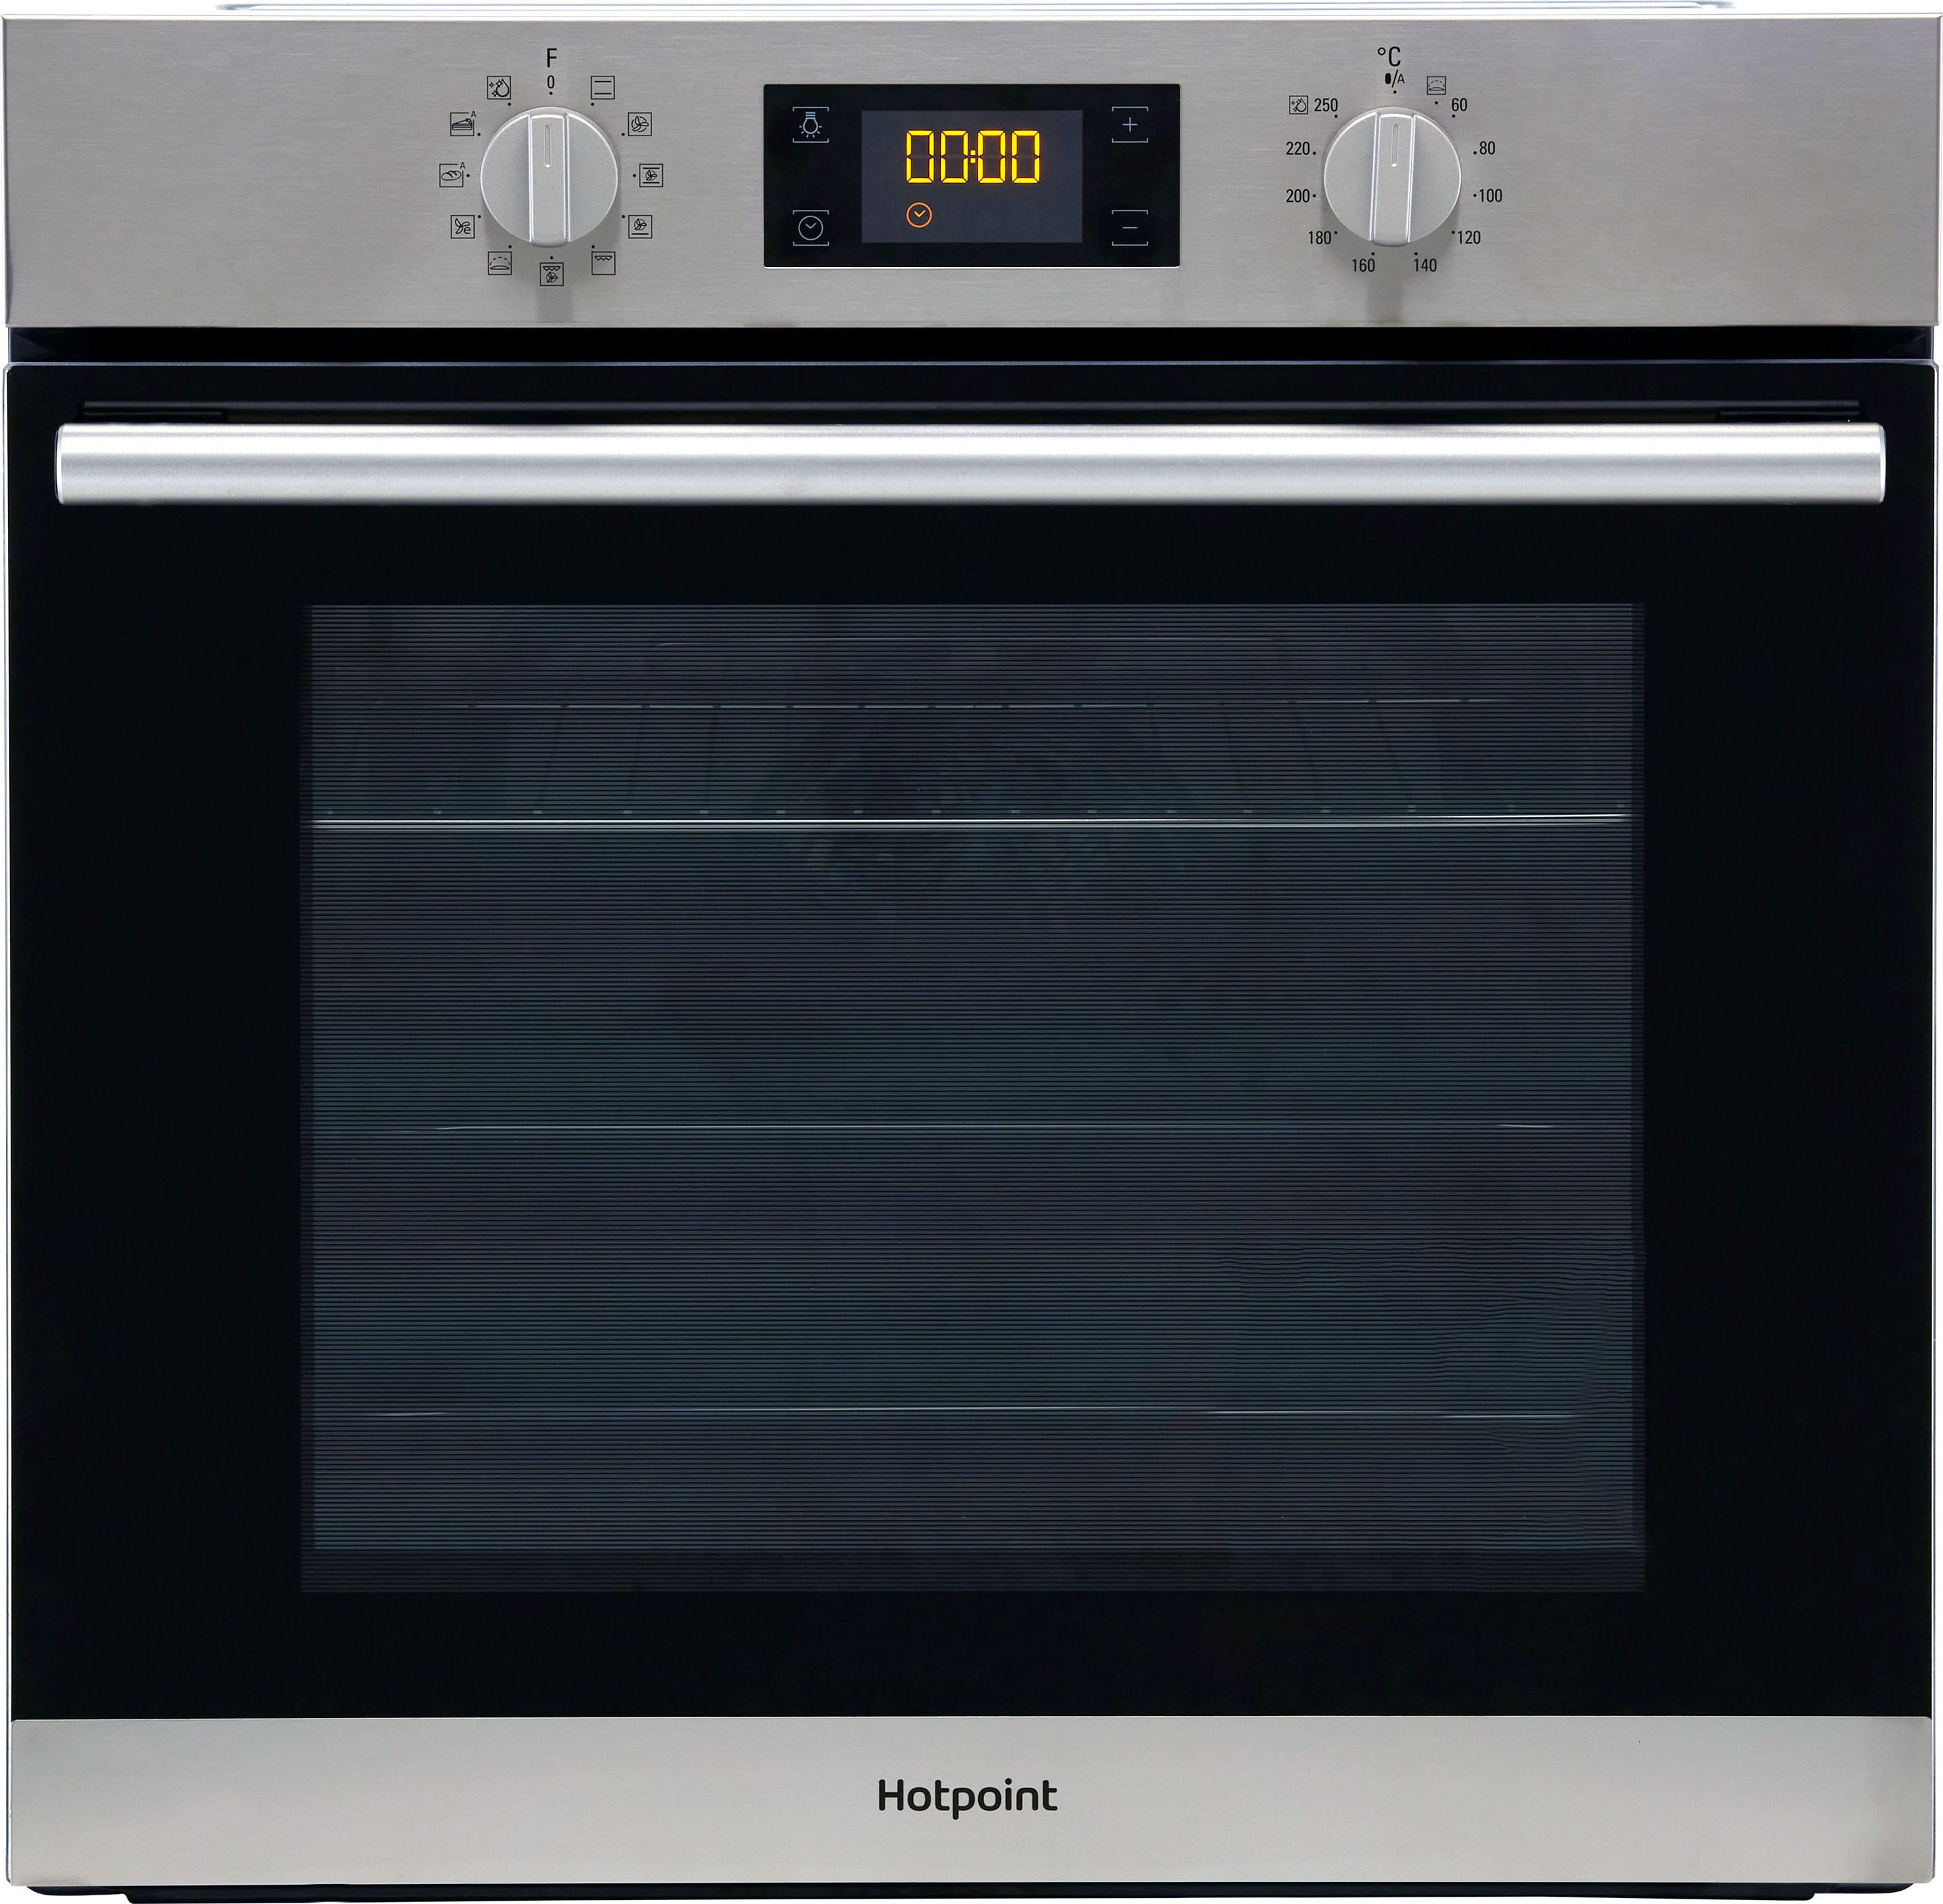 Hotpoint Class 2 SA2844HIX Built In Electric Single Oven - Stainless Steel - A+ Rated